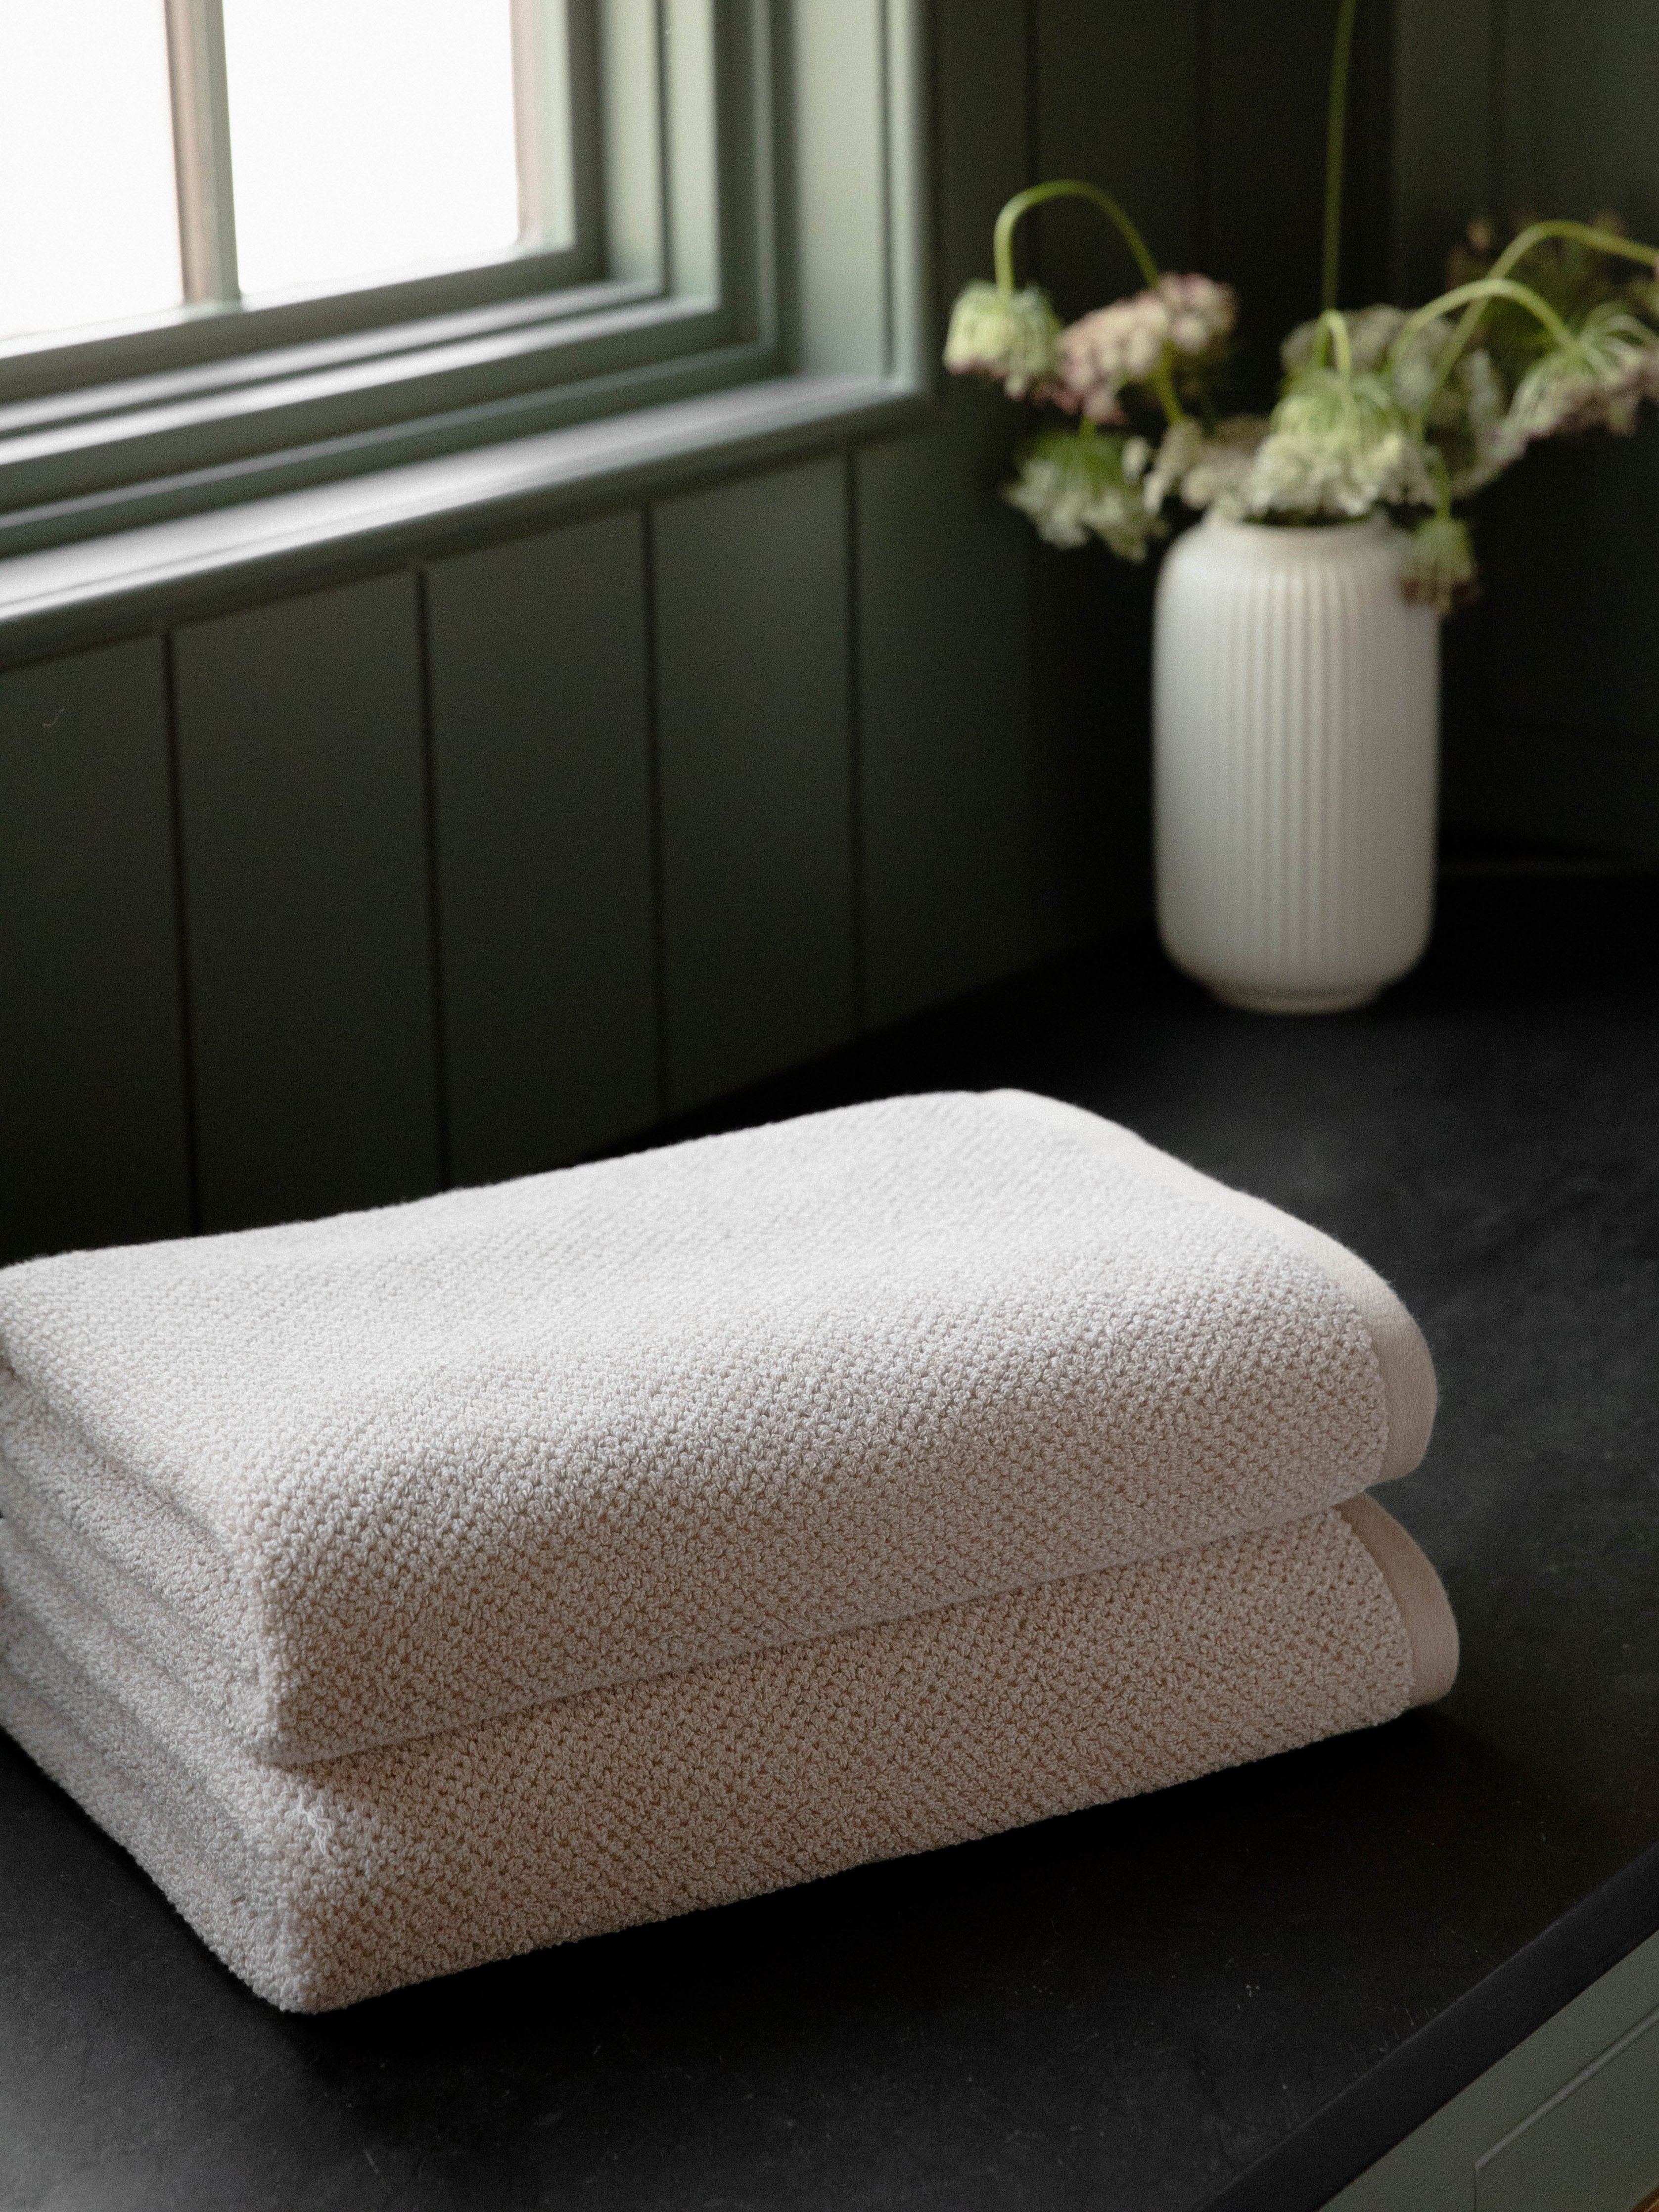 Nantucket Bath Towels in the color Heathered Sand. Photo of Nantucket Bath Towels taken with the bath towels resting on a countertop in a bathroom. |Color: Heathered Sand